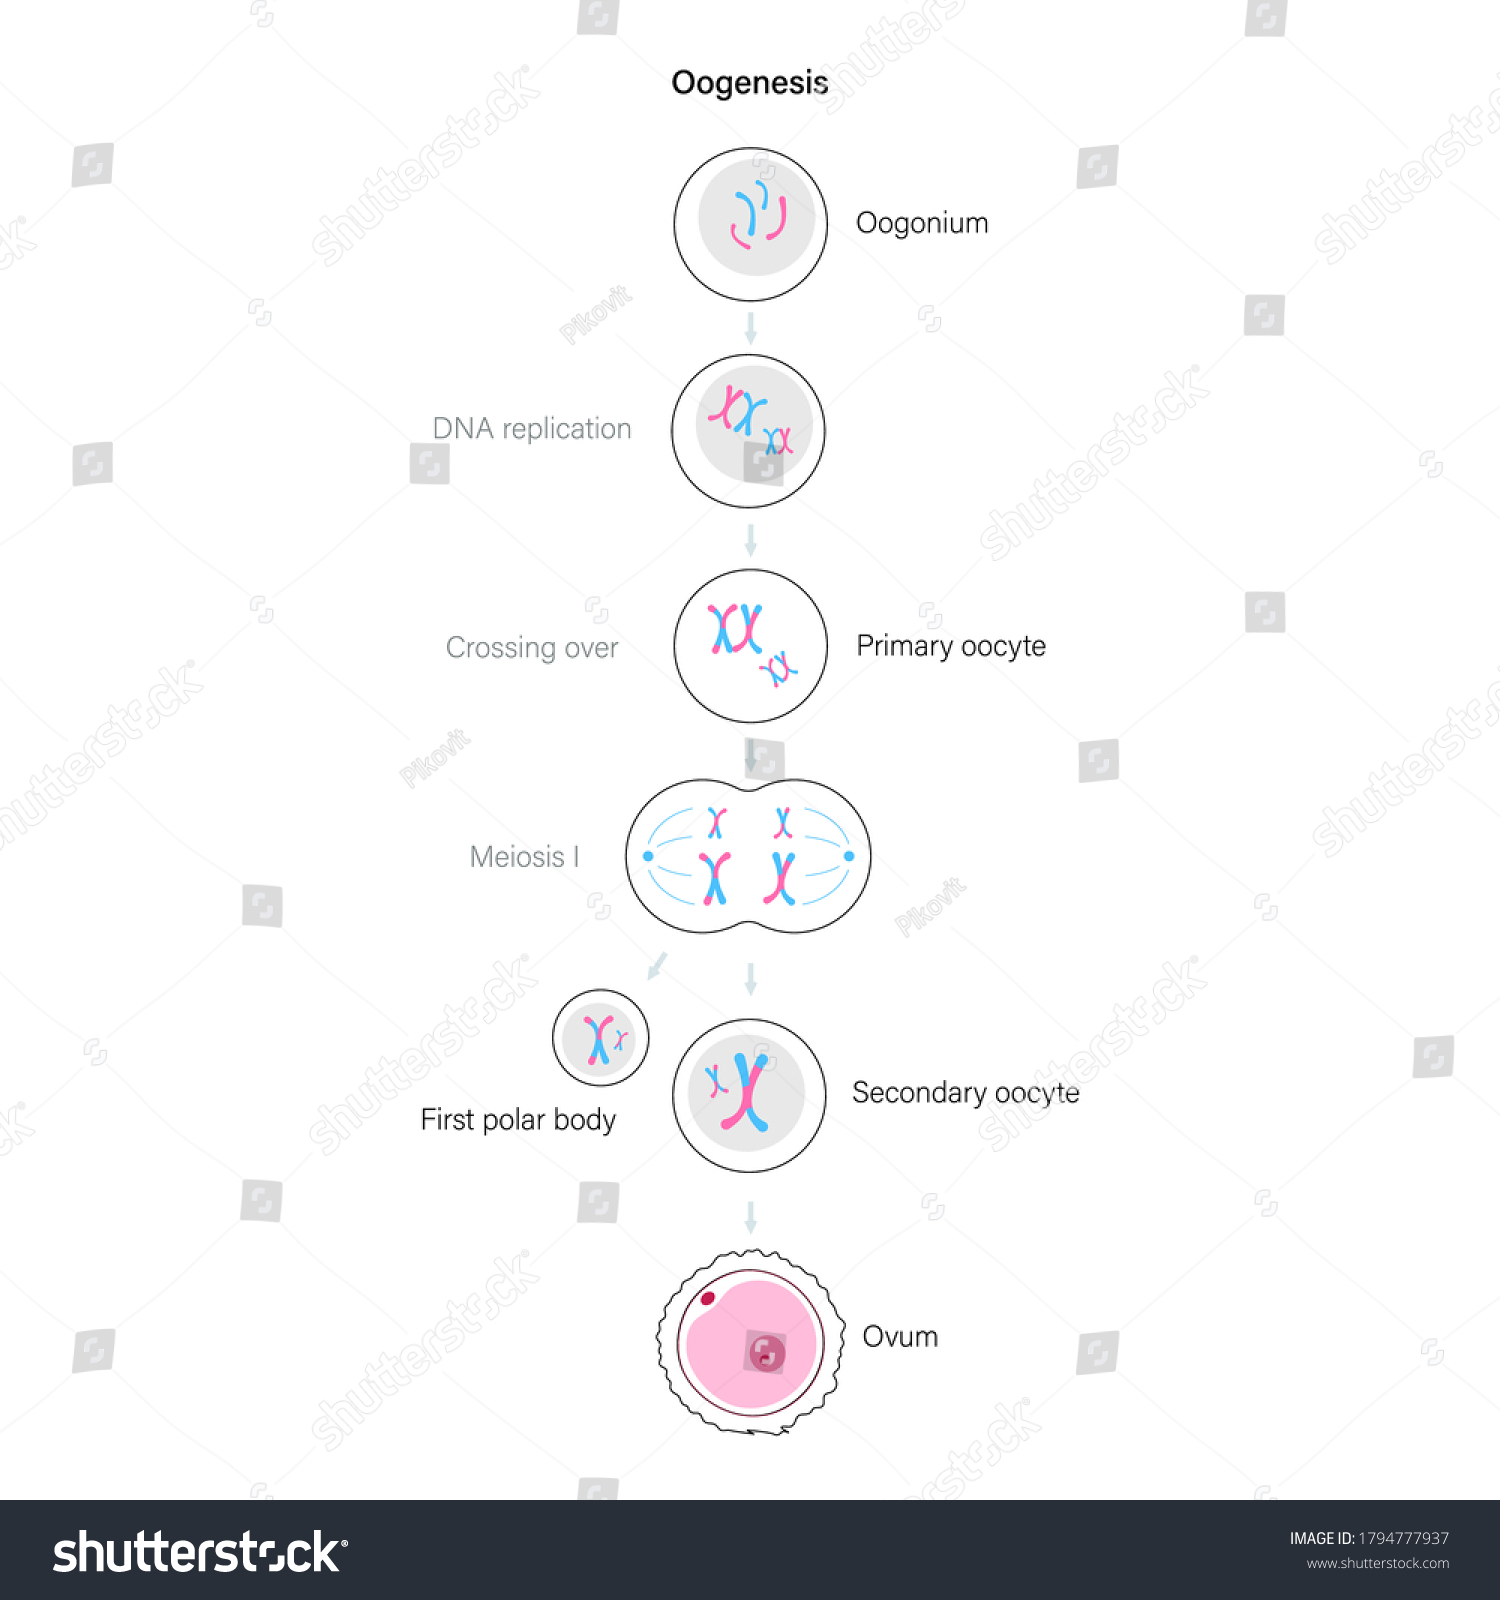 Oogenesis Cell Division Diploid Cells Dna Stock Vector Royalty Free 1794777937 Shutterstock 